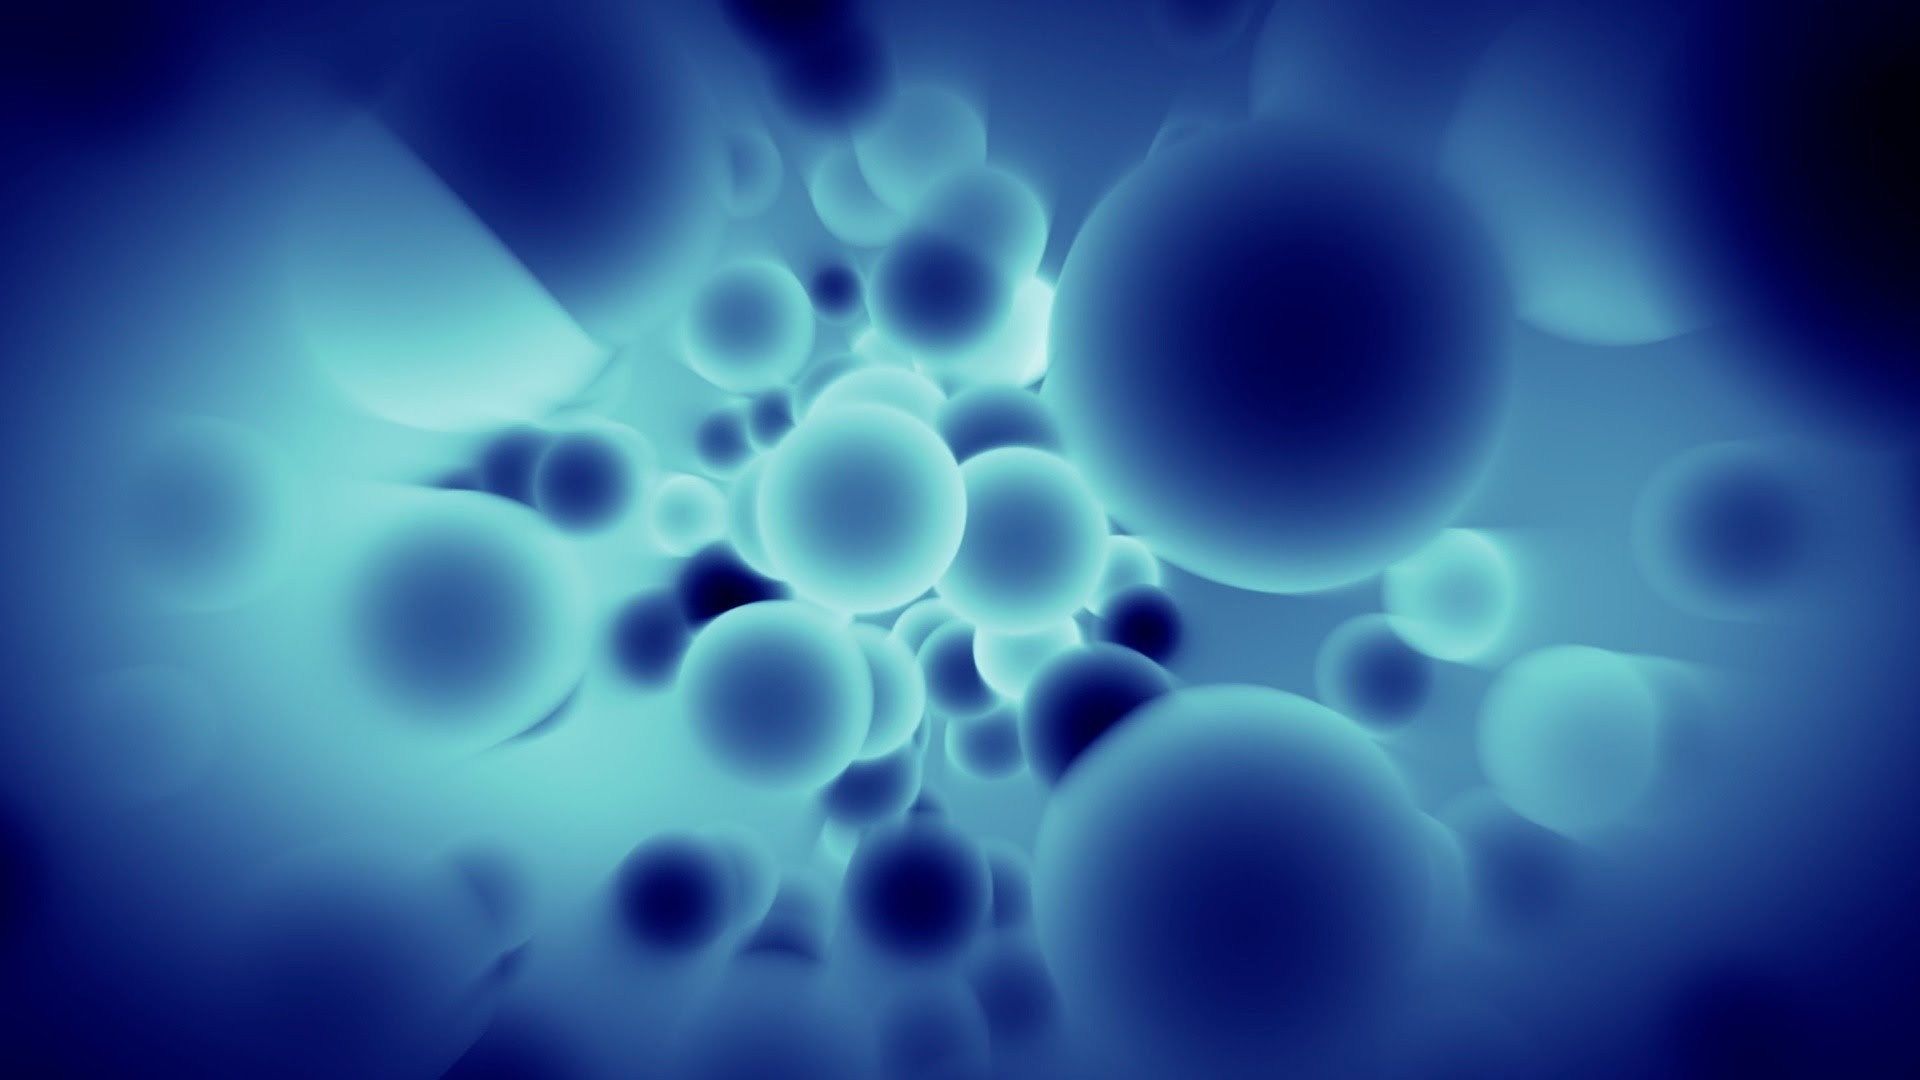 Bacteria Wallpaper 52 Image HD Background, Download